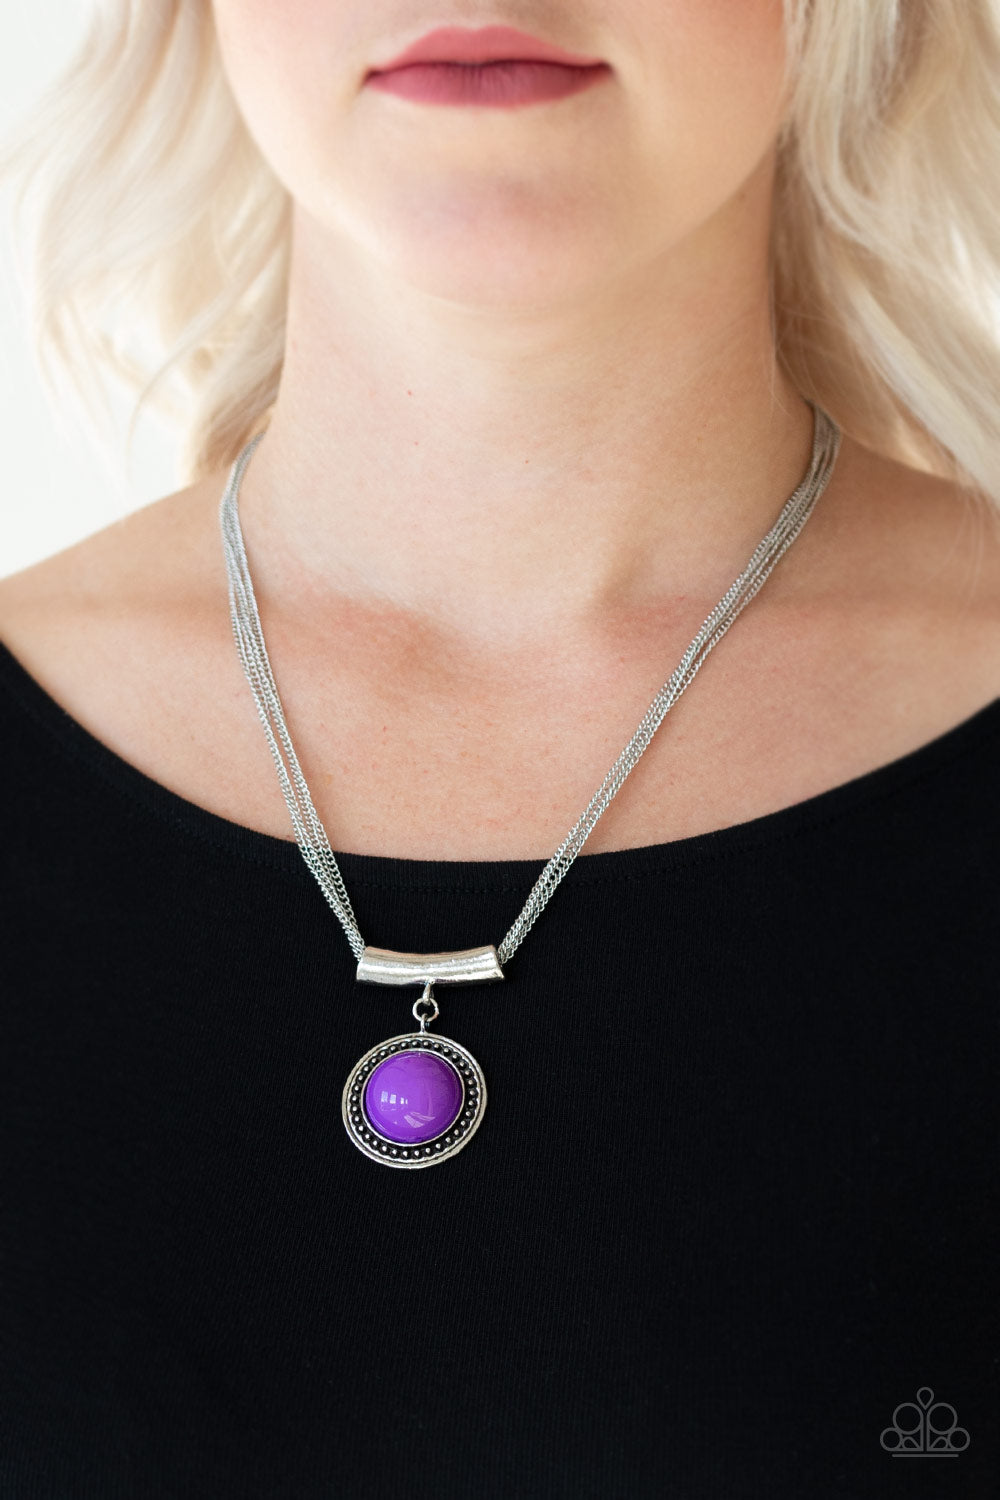 Gypsy Gulf- Purple and Silver Necklace- Paparazzi Accessories